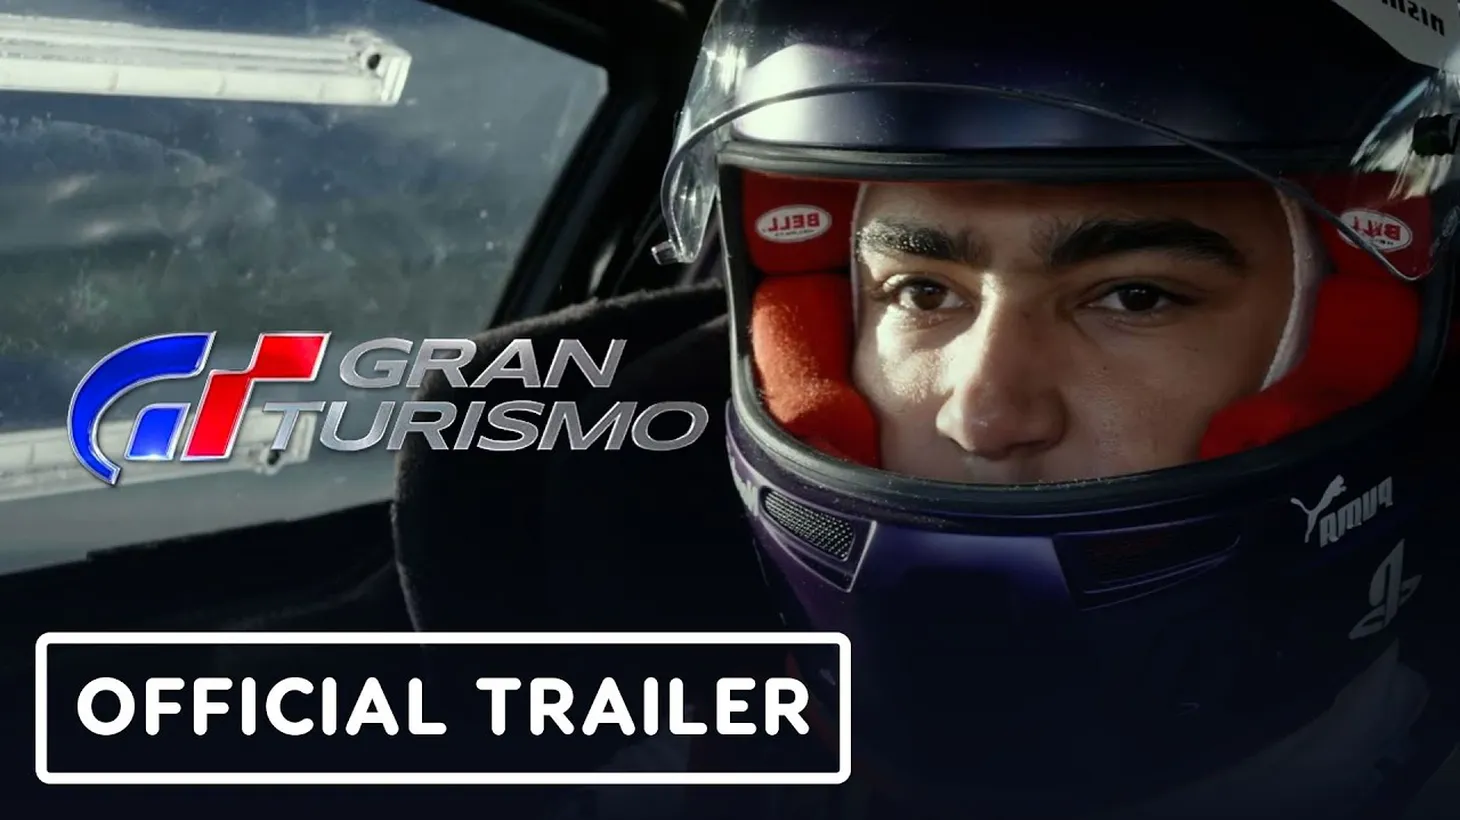 “Gran Turismo” is based on a true story about a teenage gamer who became a real-life racer.